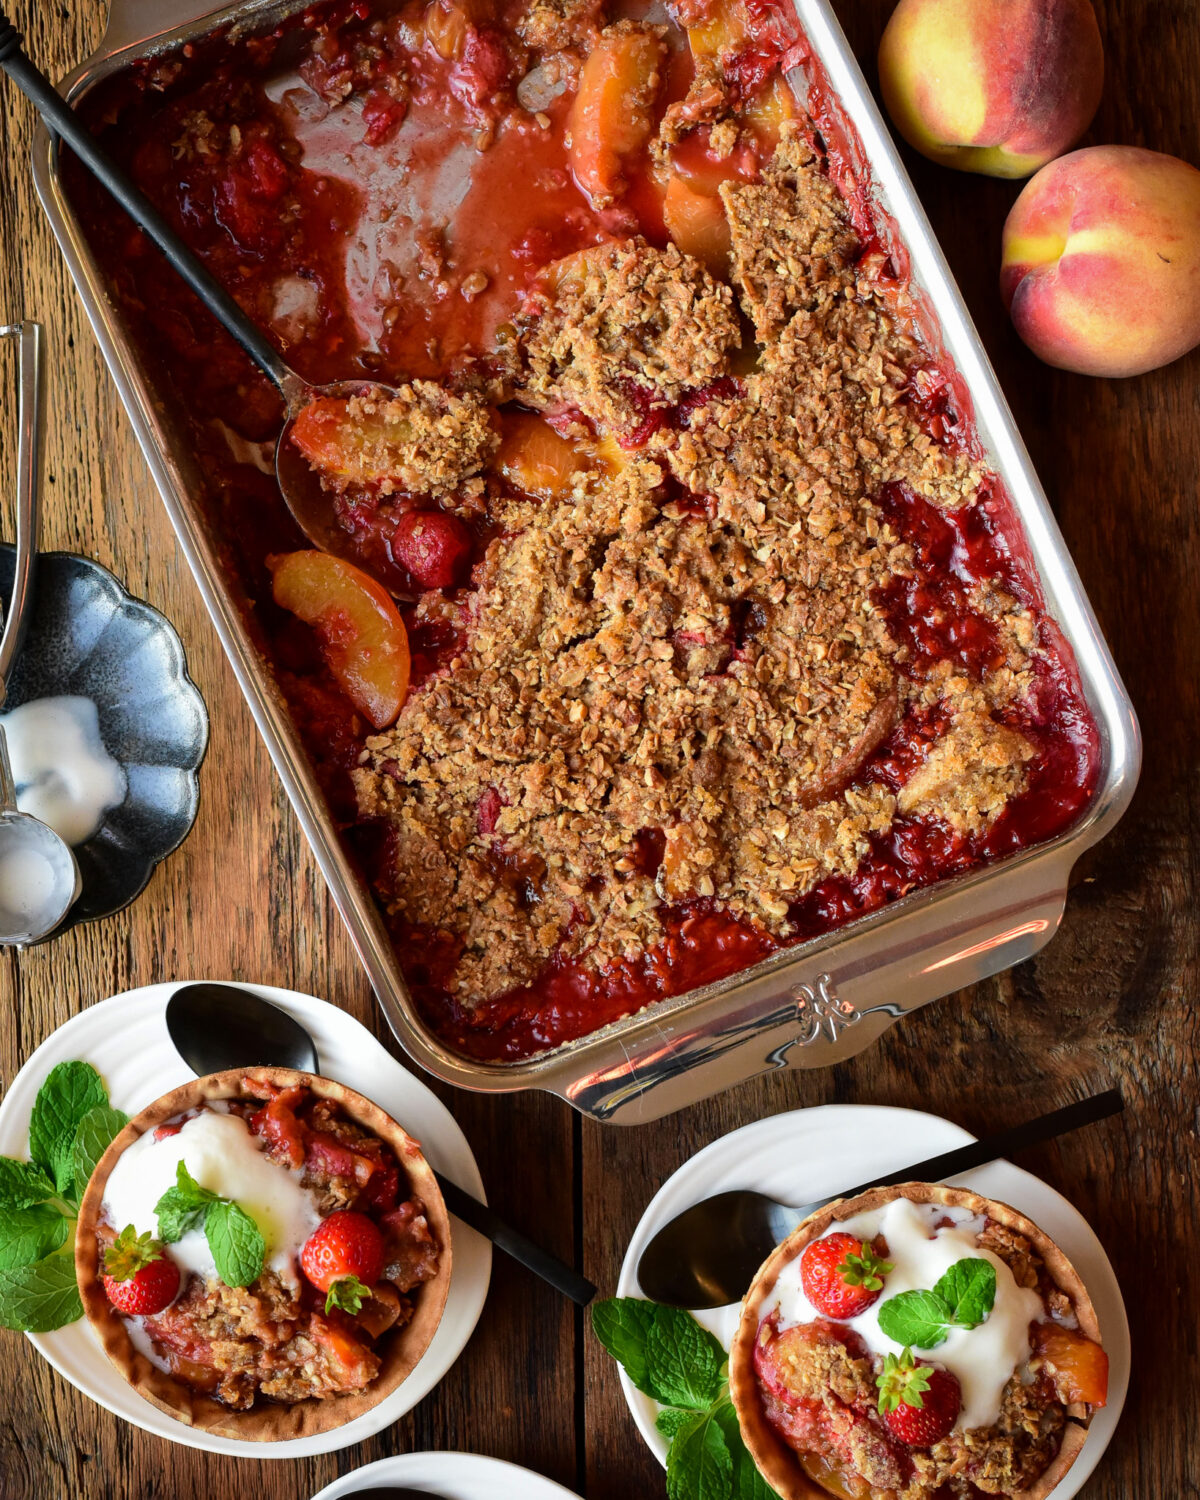 A baking tray with a baked Peach Strawberry Crisp with two bowls served with ice cream and mint.